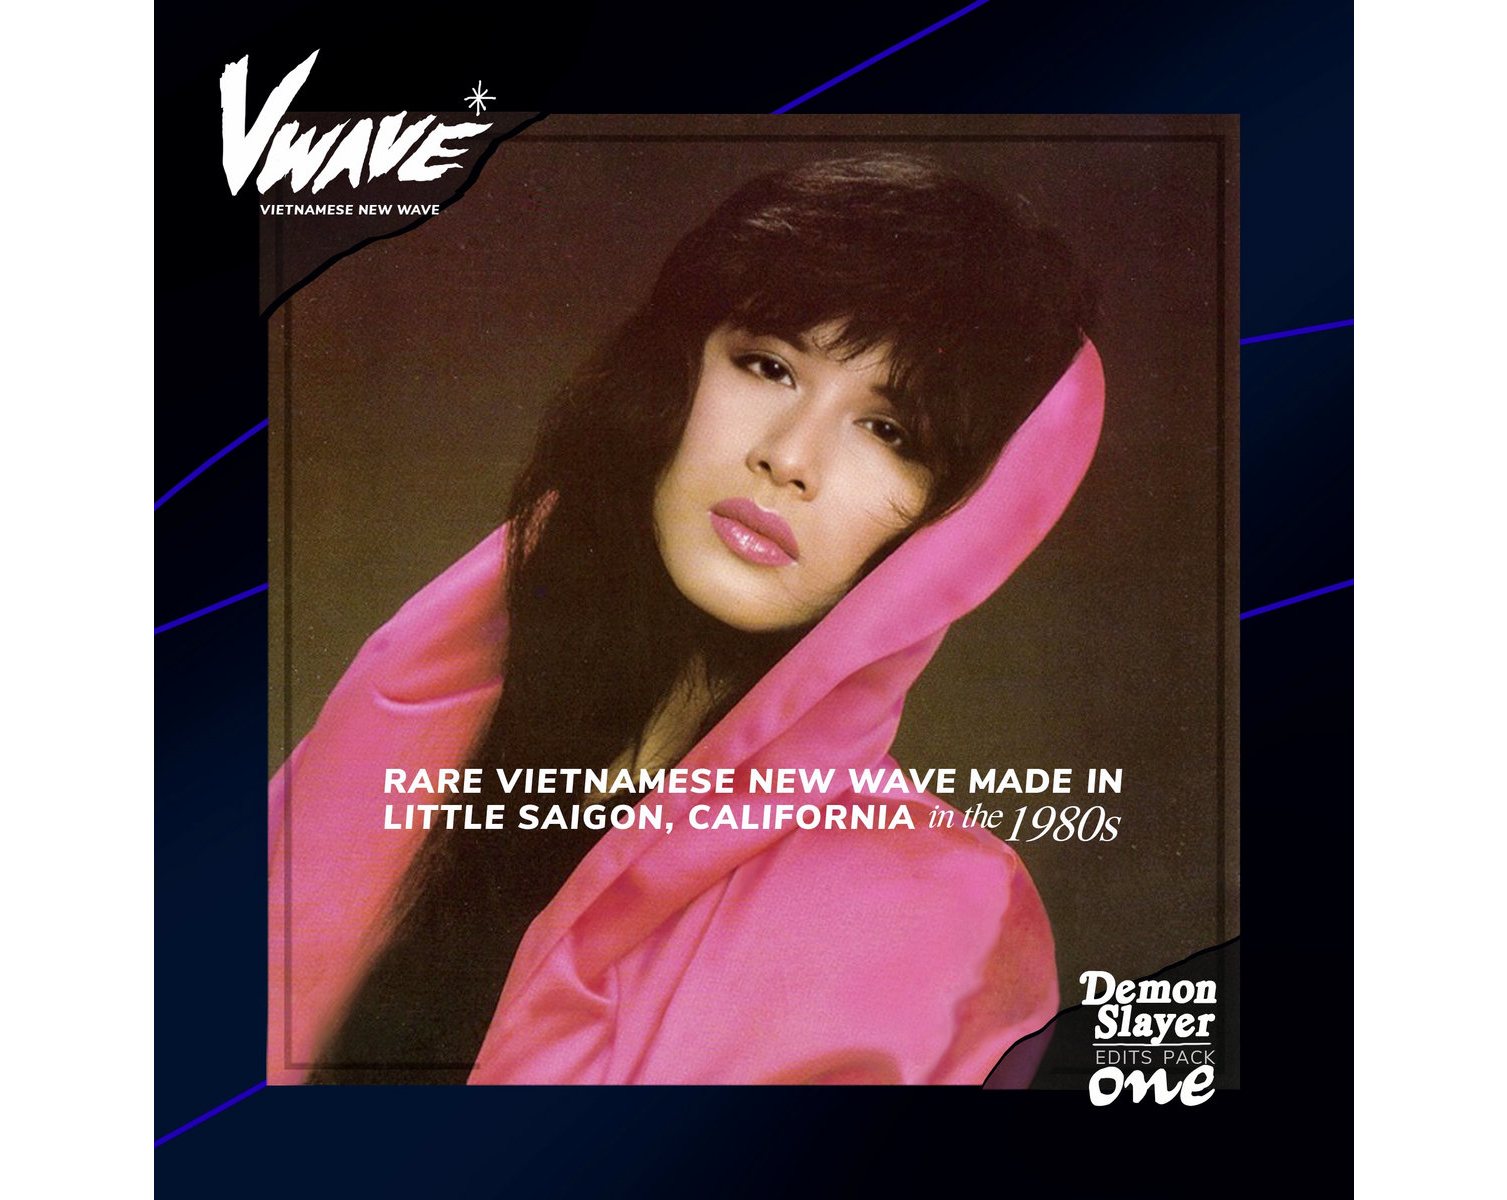 Listen to rare Vietnamese New Wave from 1980s